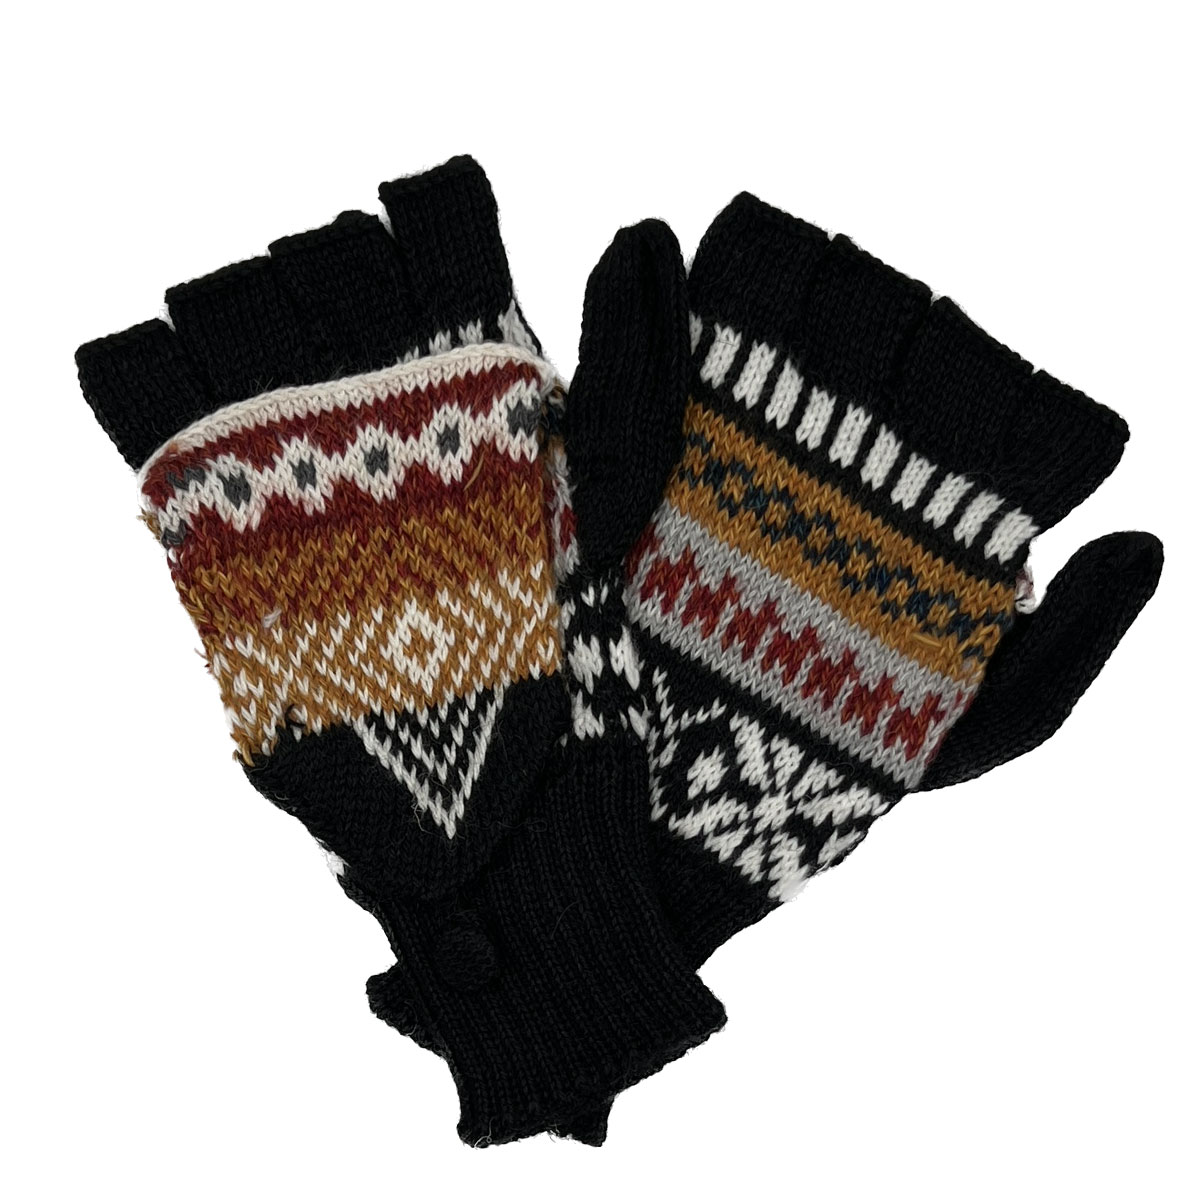 Baby Alpaca Glittens in Black and Mixed Color Designs